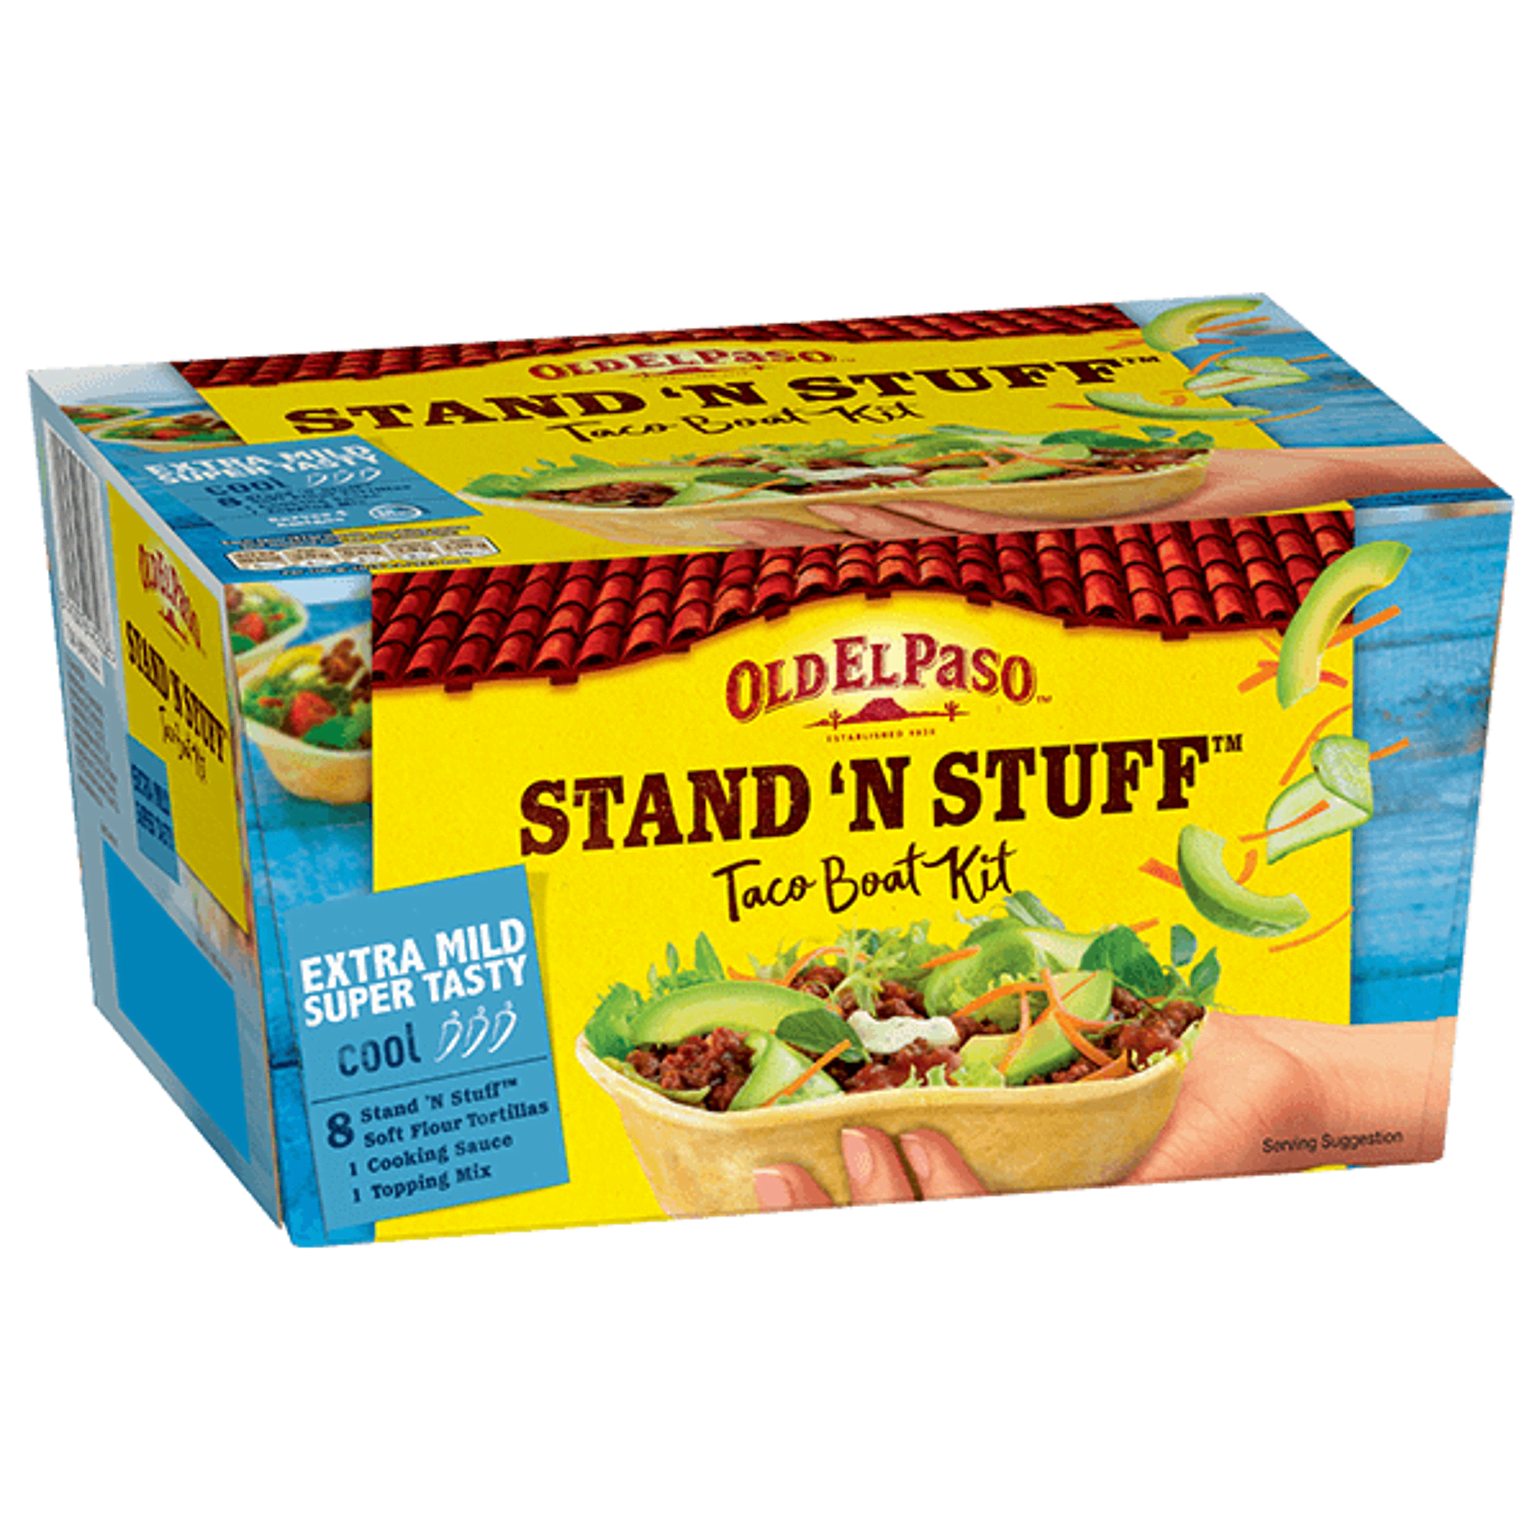 pack of Old El Paso's extra mild super tasty Stand N Stuff taco boat kit (329g)